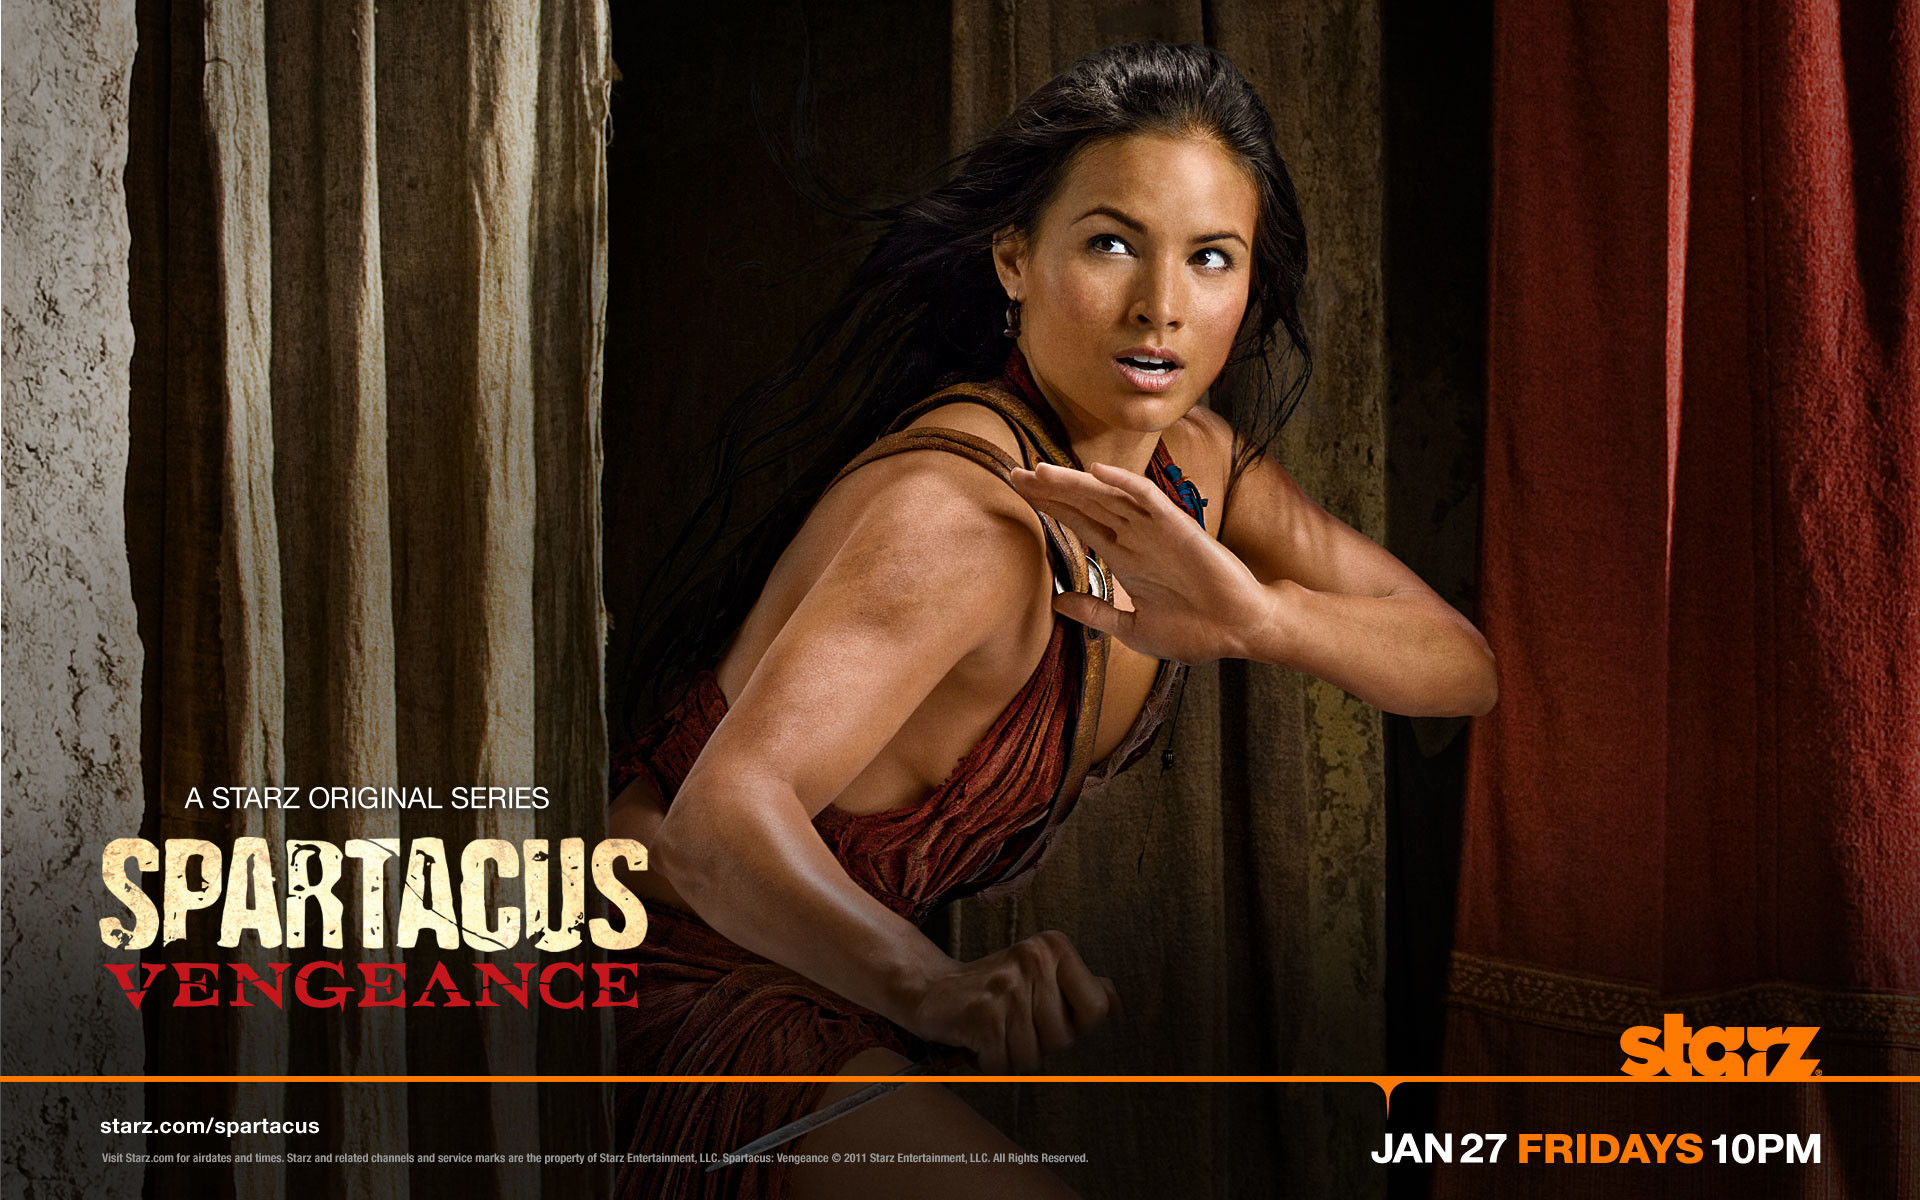 1920x1200 Spartacus: Vengeance - Mira wallpapers and stock photos